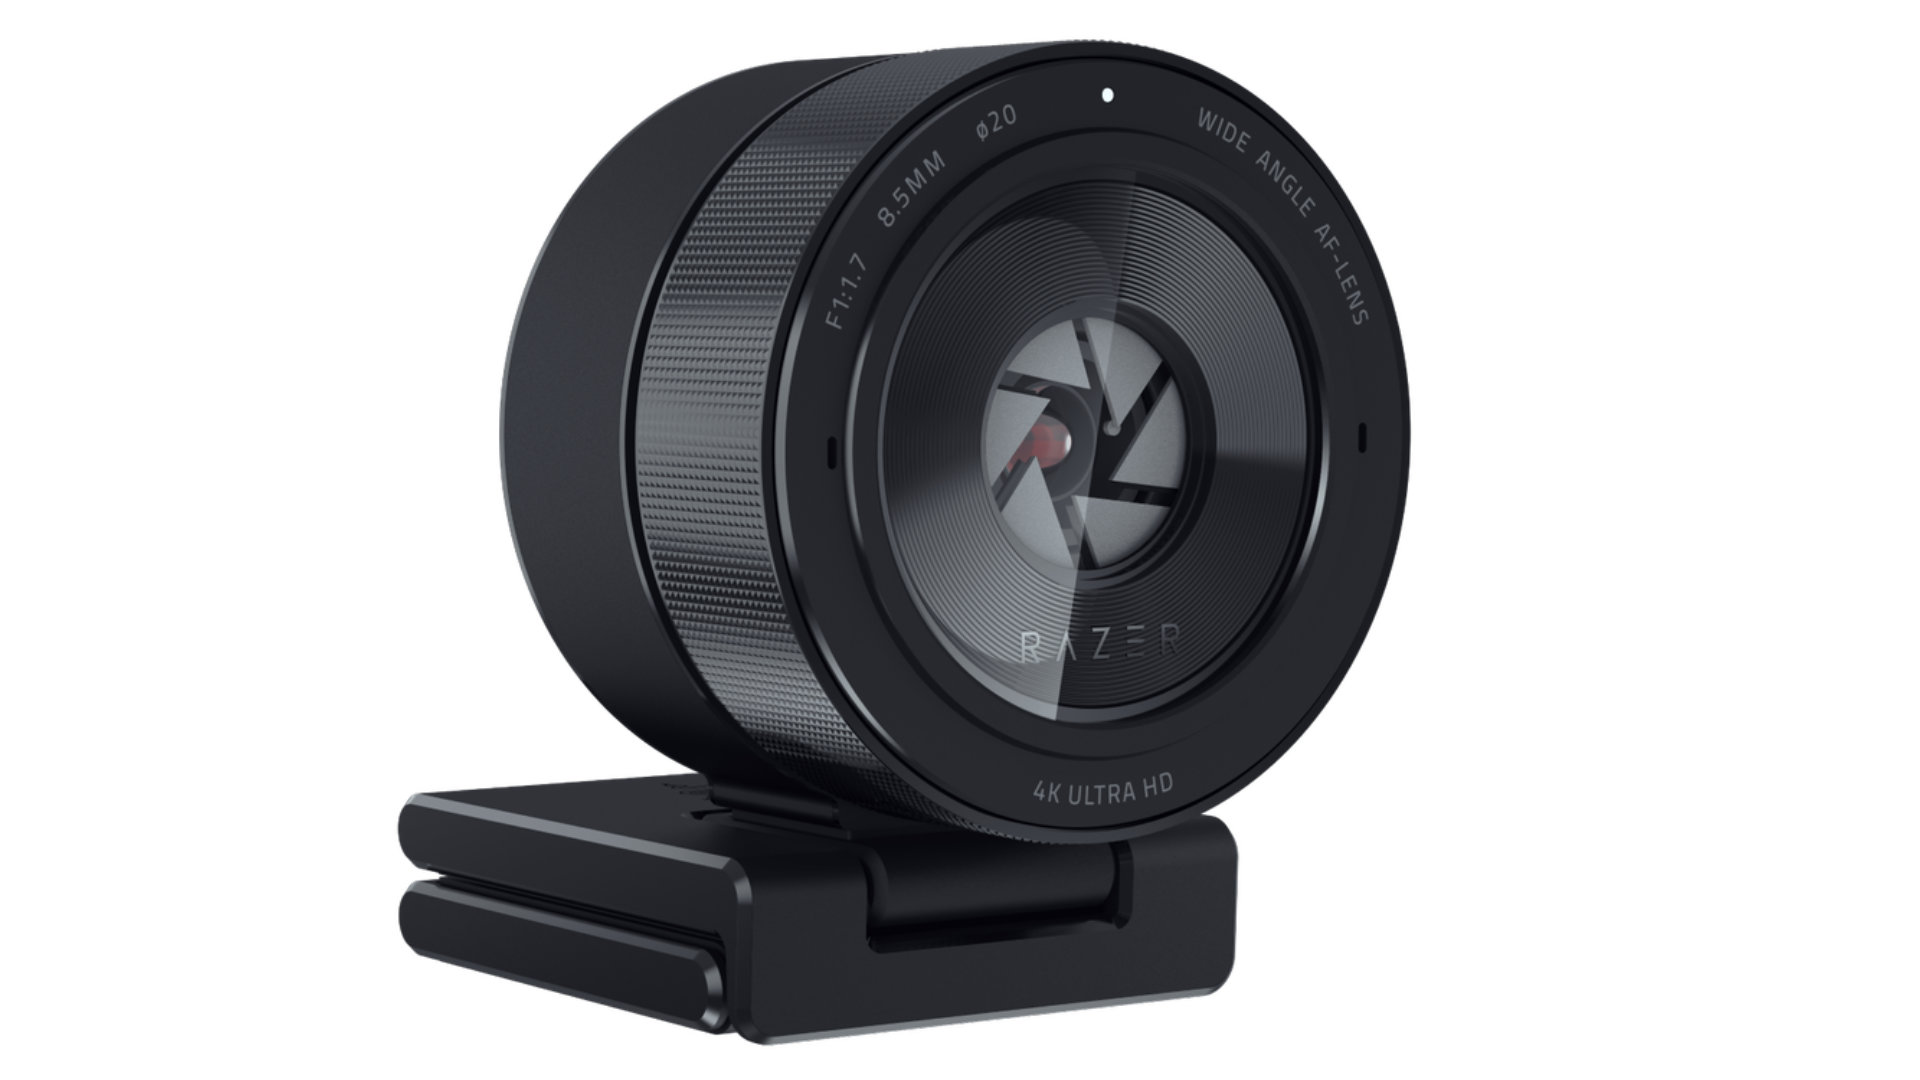 5 best webcams for streaming in 2023